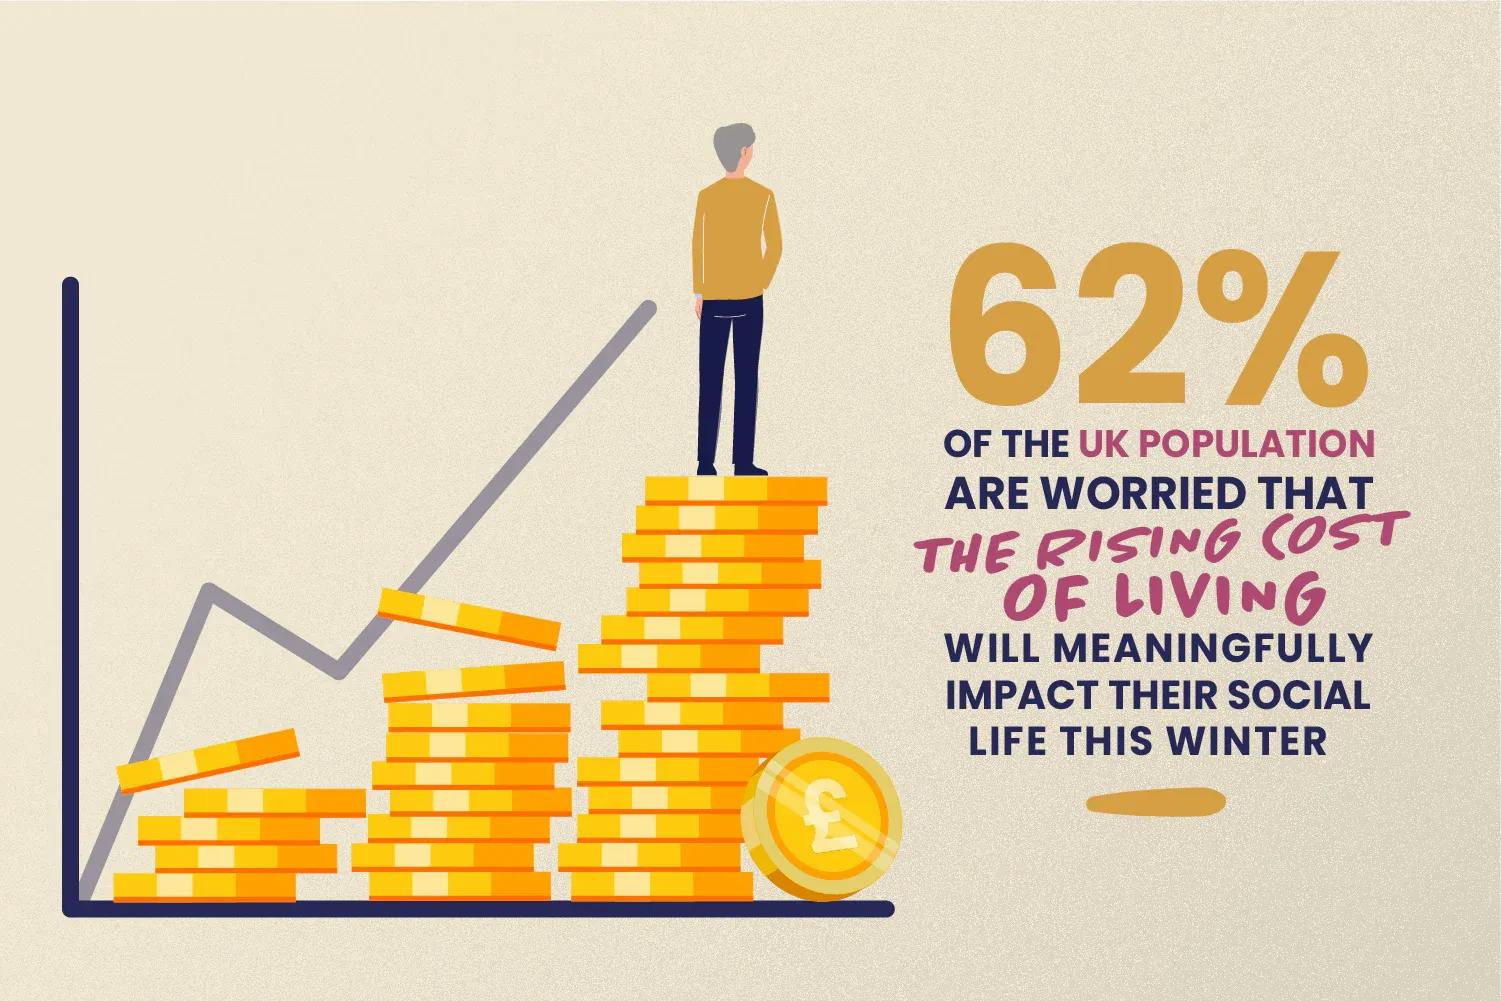 62% of the UK are worried about the rising cost of living